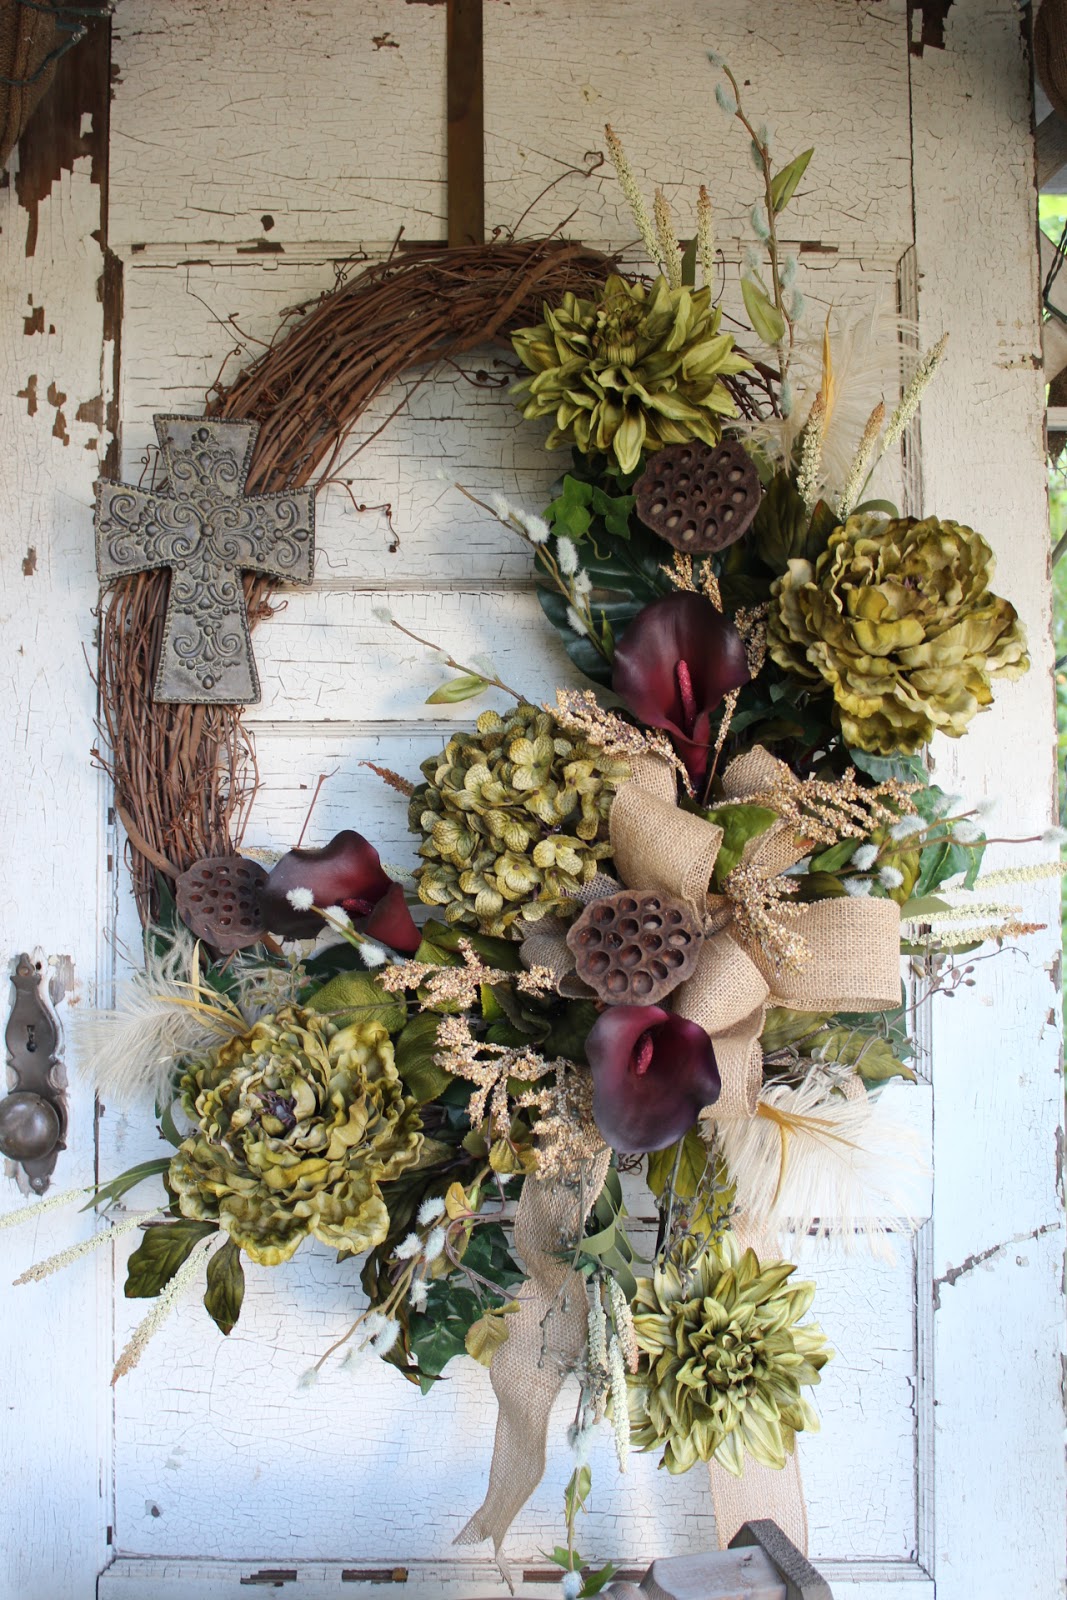 GypsyFarmGirl: Howdy! A Preview of New Wreaths Available